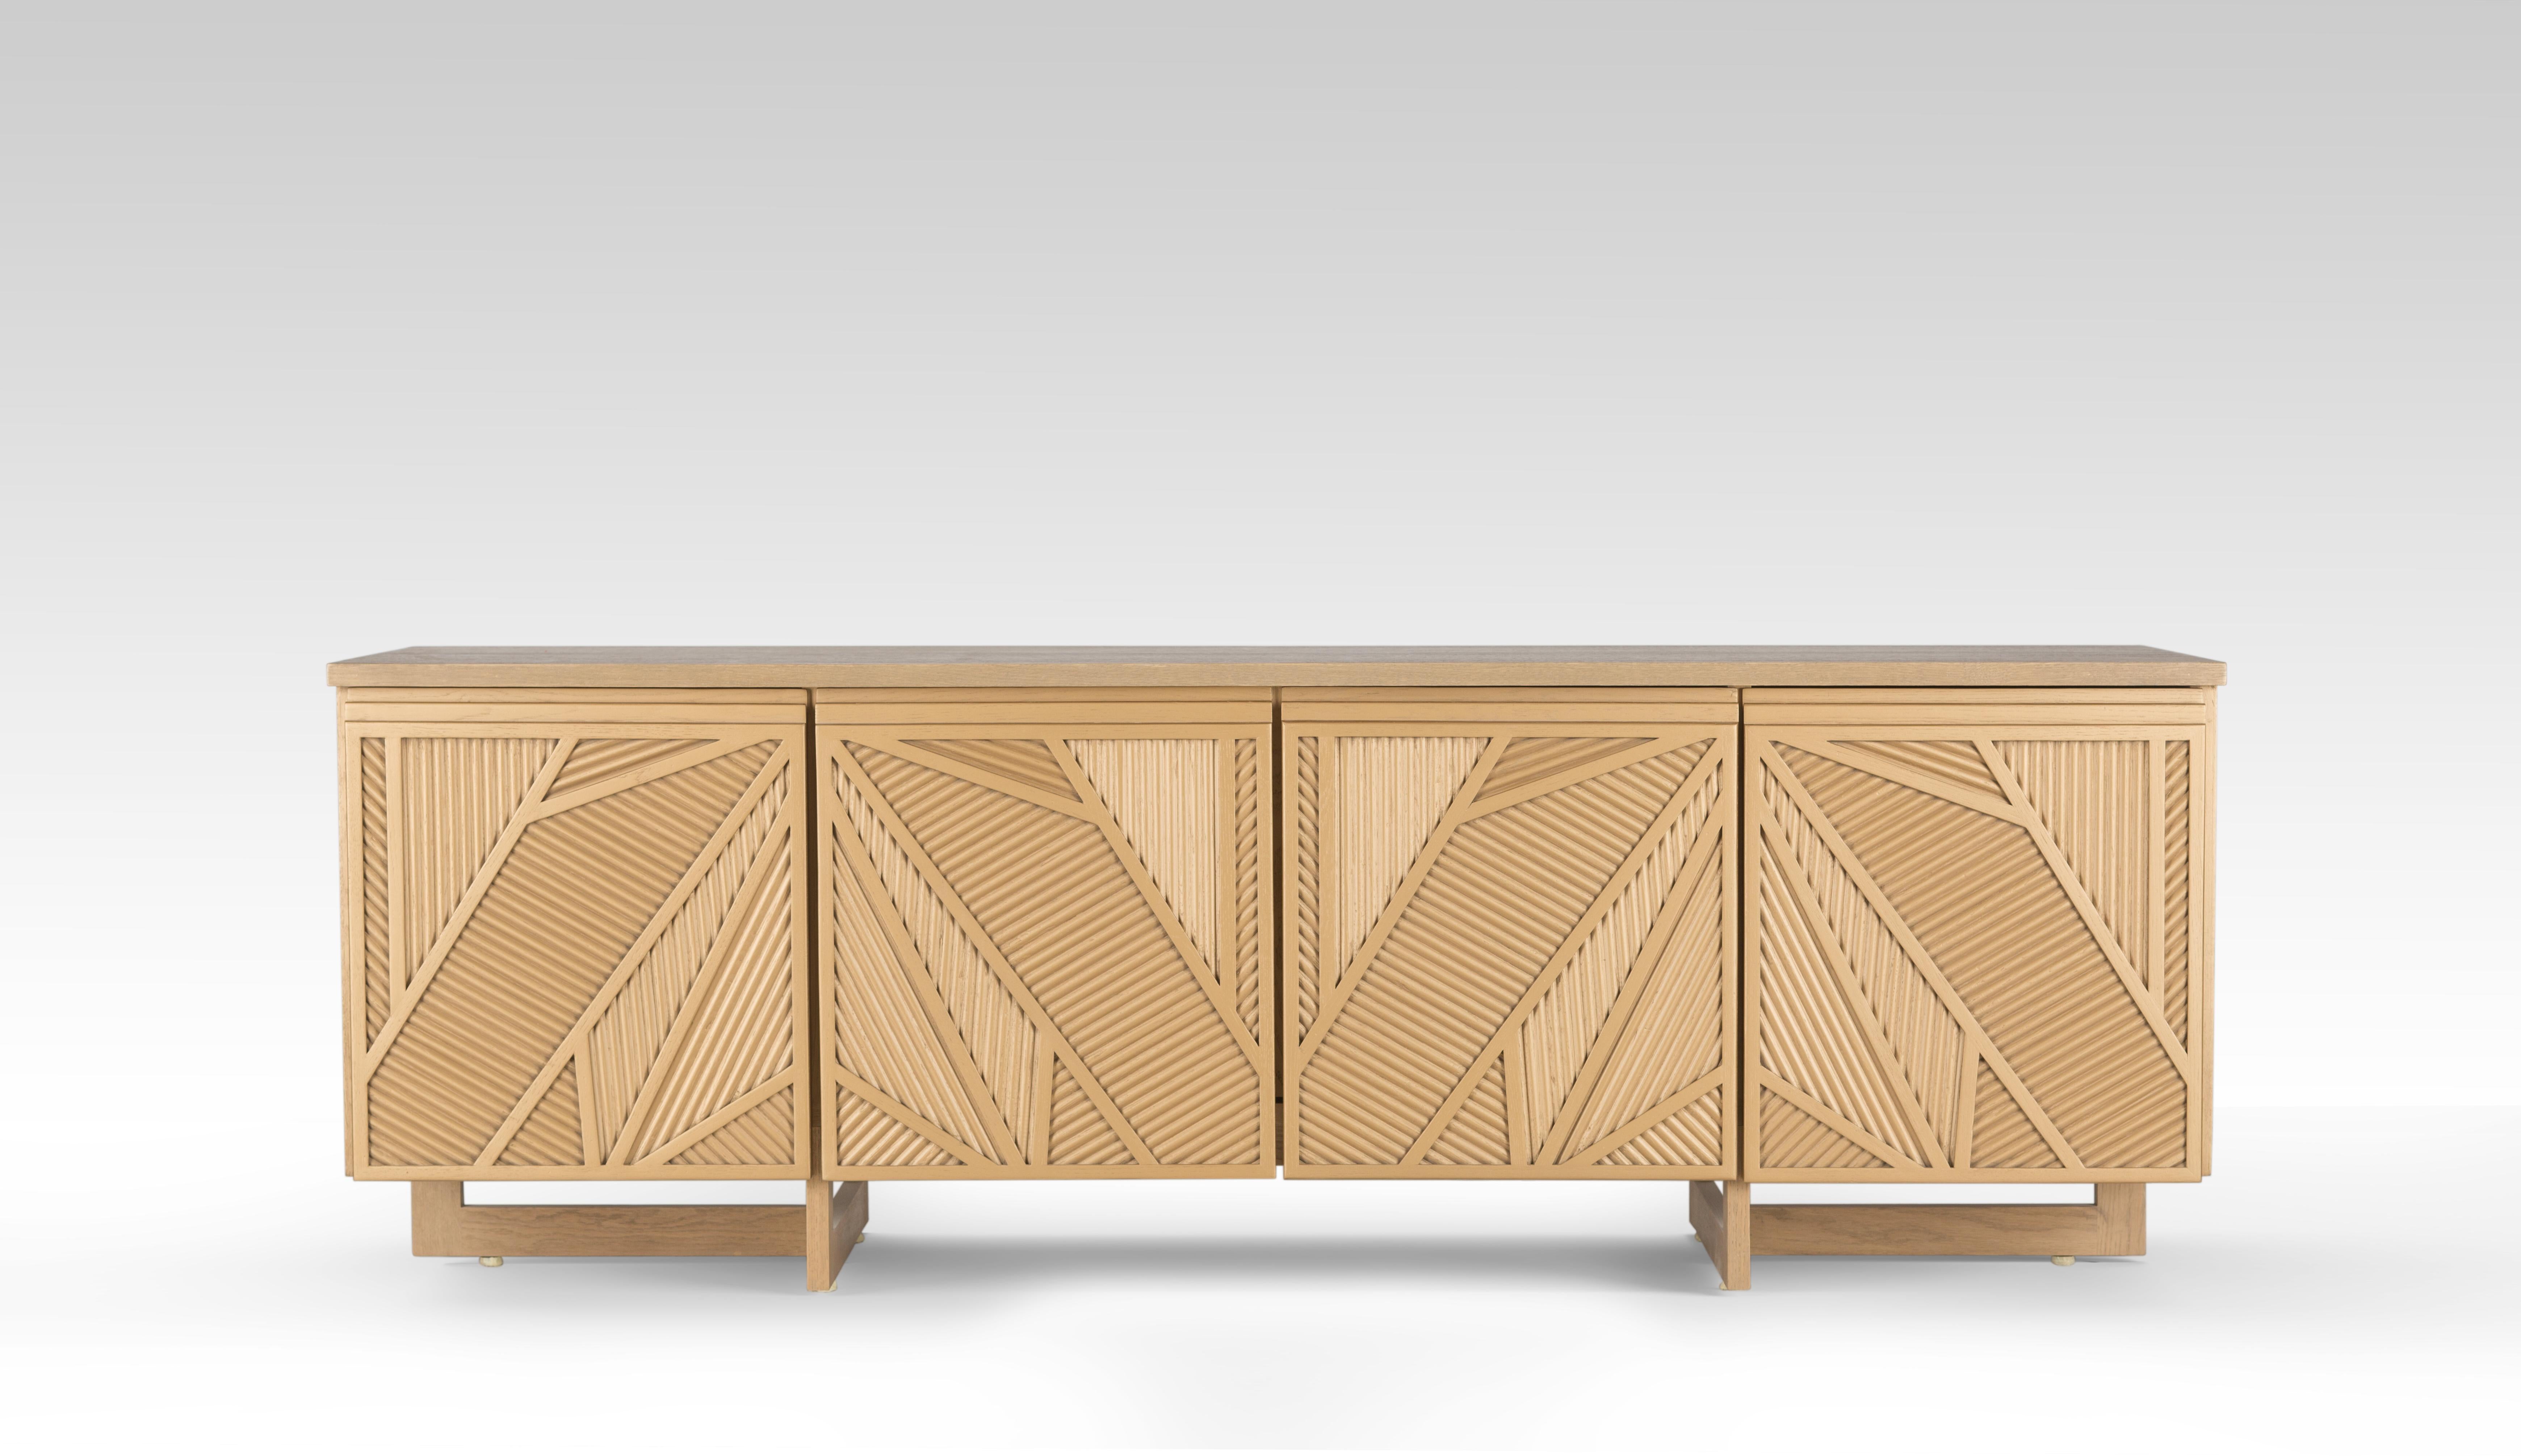 Geometric Oak Sticks TV Unit Inspired from Ancient Egypt Use of Palm Branches. 
Our unique Cool Palm TV unit is made of stained Oak wood sticks manifesting the use of woven palms in the Egyptian heritage. The dynamic pattern of the cabinet will